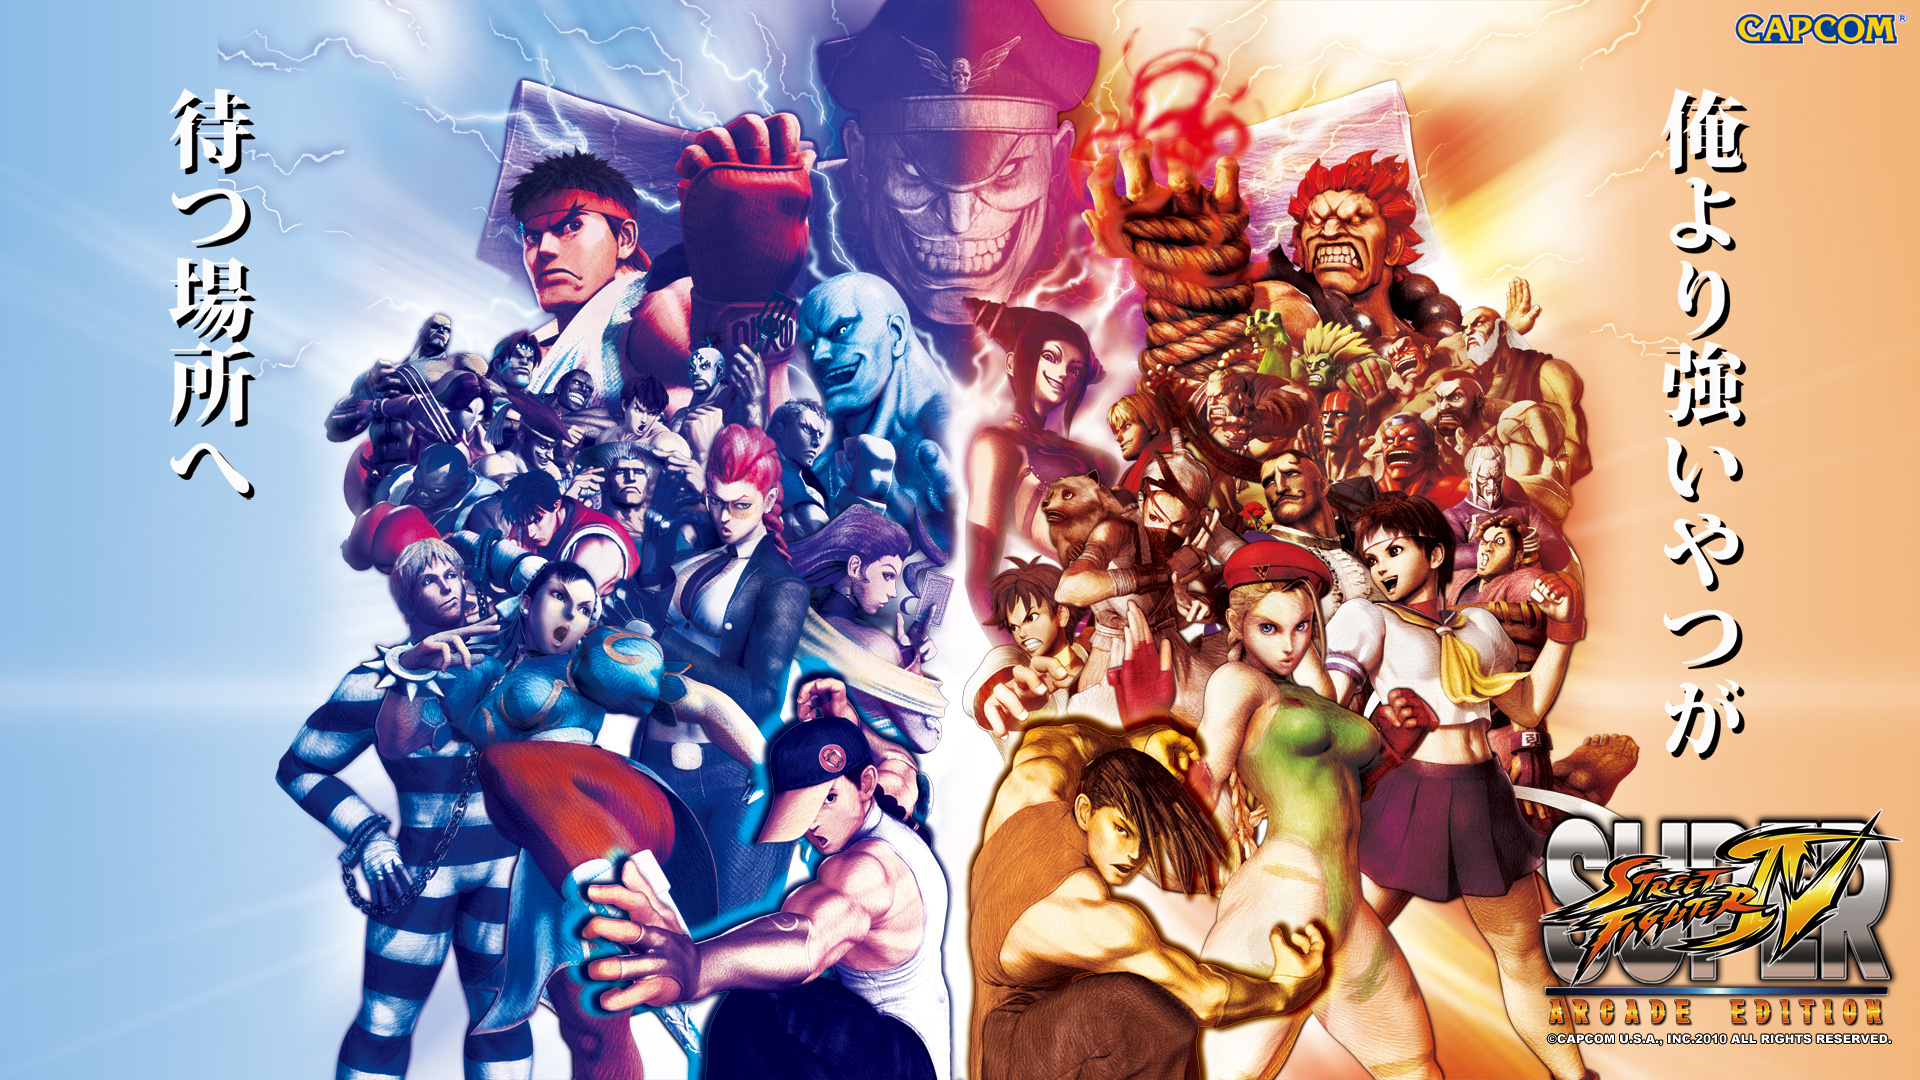 Ultra Street Fighter IV review, Games